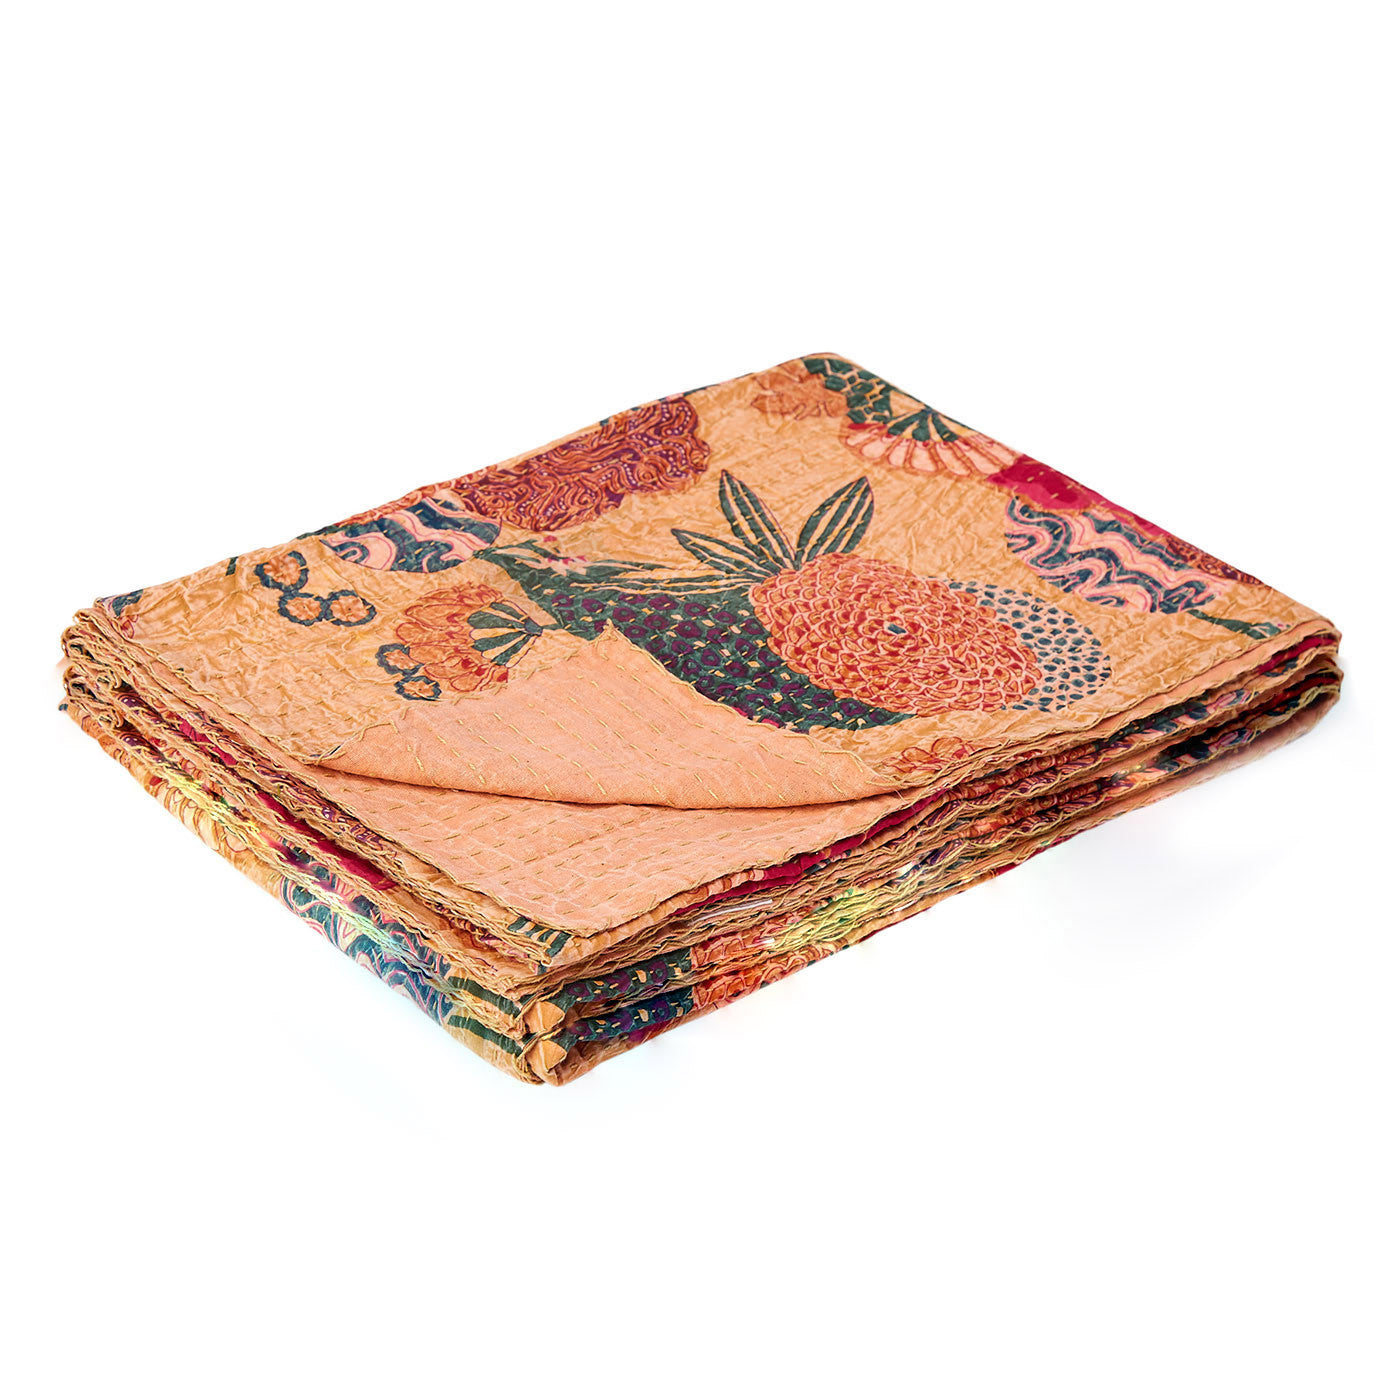 50" X 70" Orange and Red Kantha Cotton Floral Throw Blanket with Embroidery